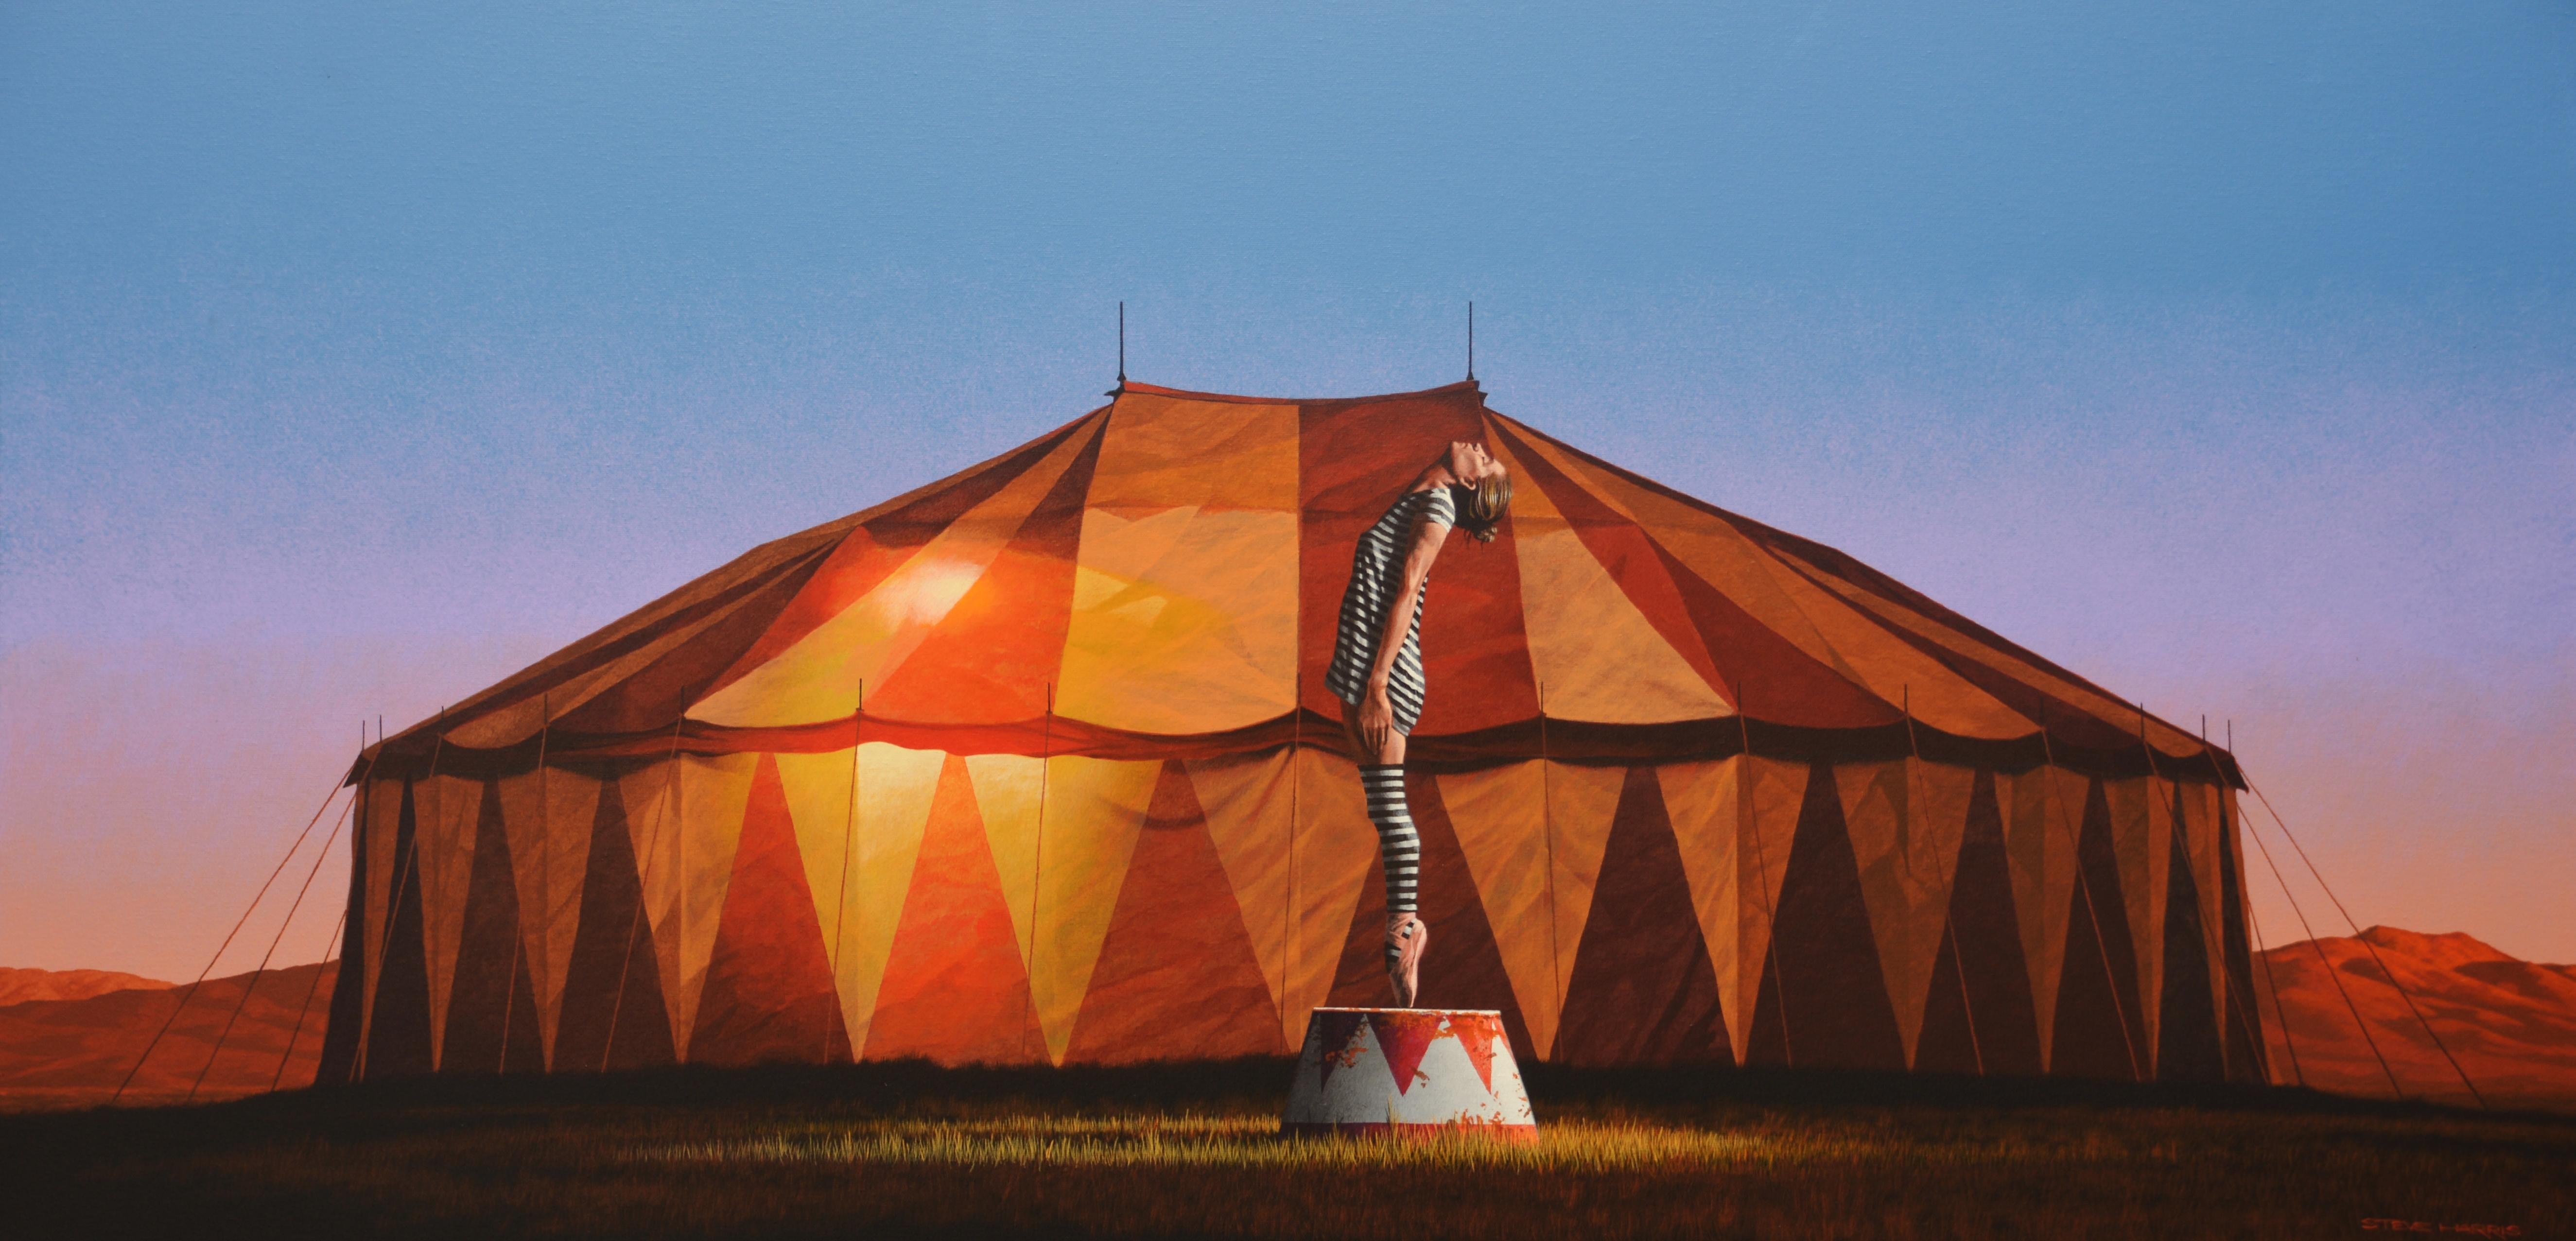 Steve Harris Figurative Painting - Travelling Ballet Show - Circus Tent at Dusk with Acrobat, Figurative, Dancer